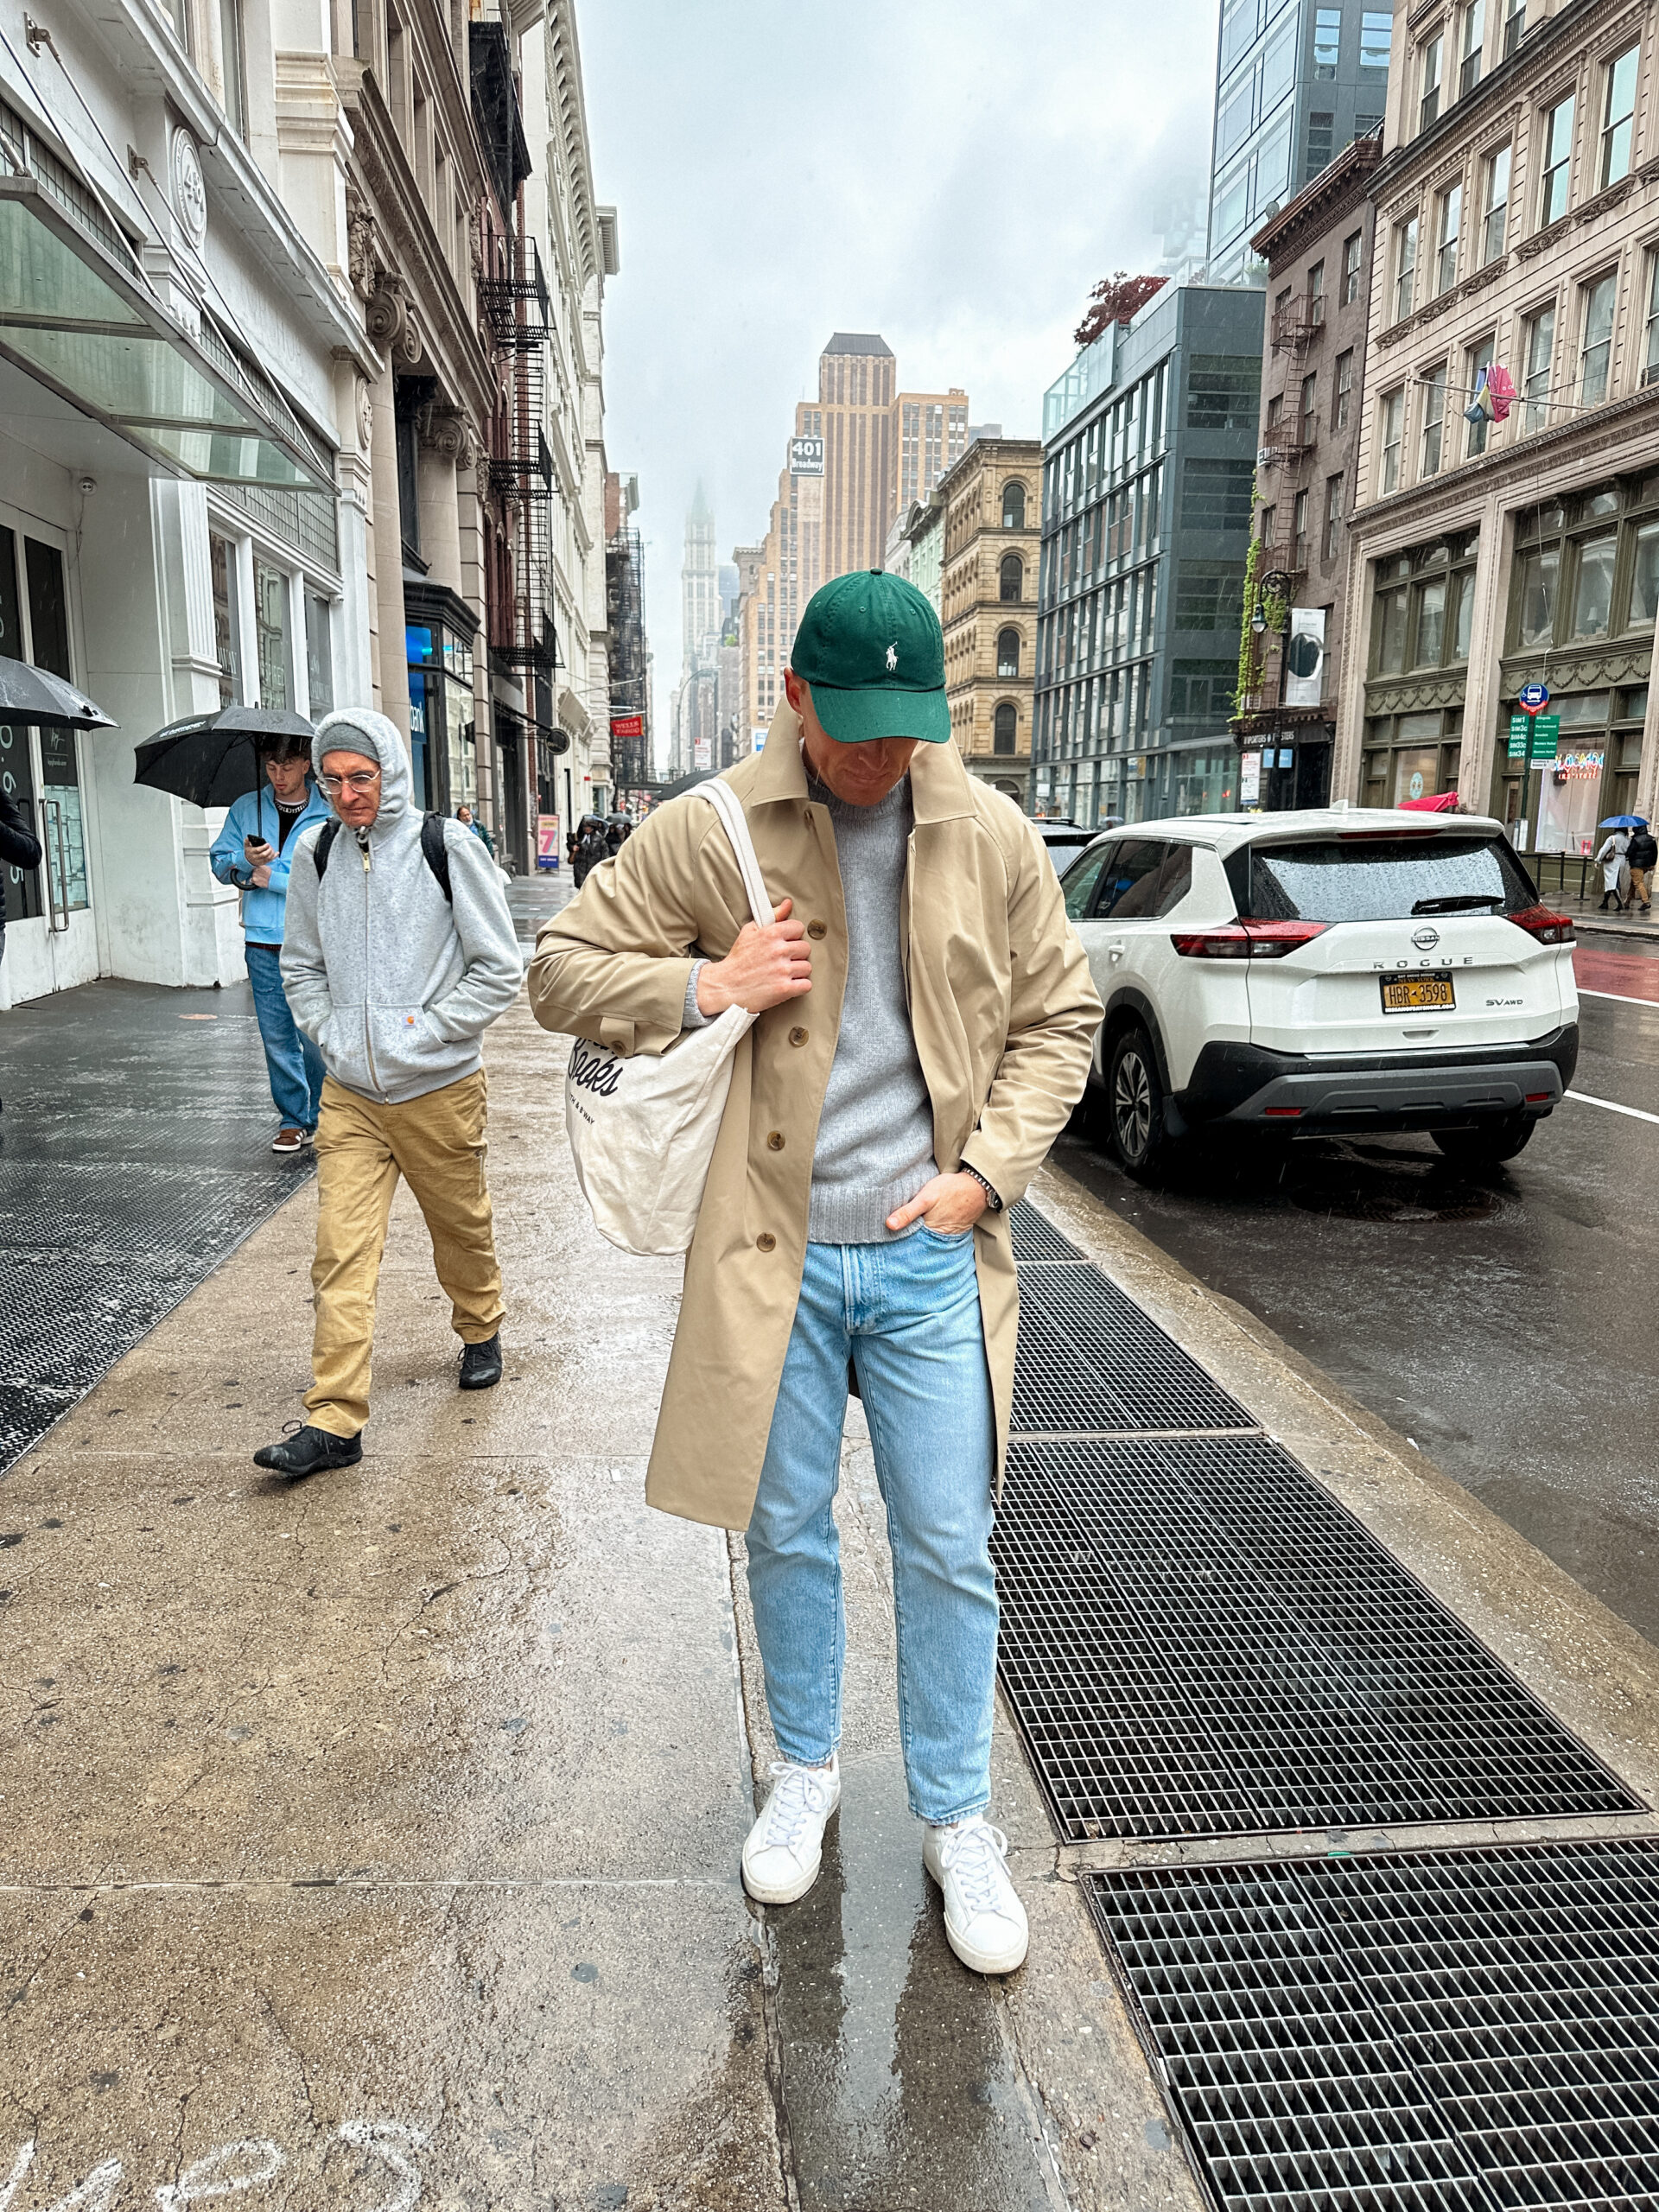 5 Outfits I Wore in NYC: Rainy Day in SoHo